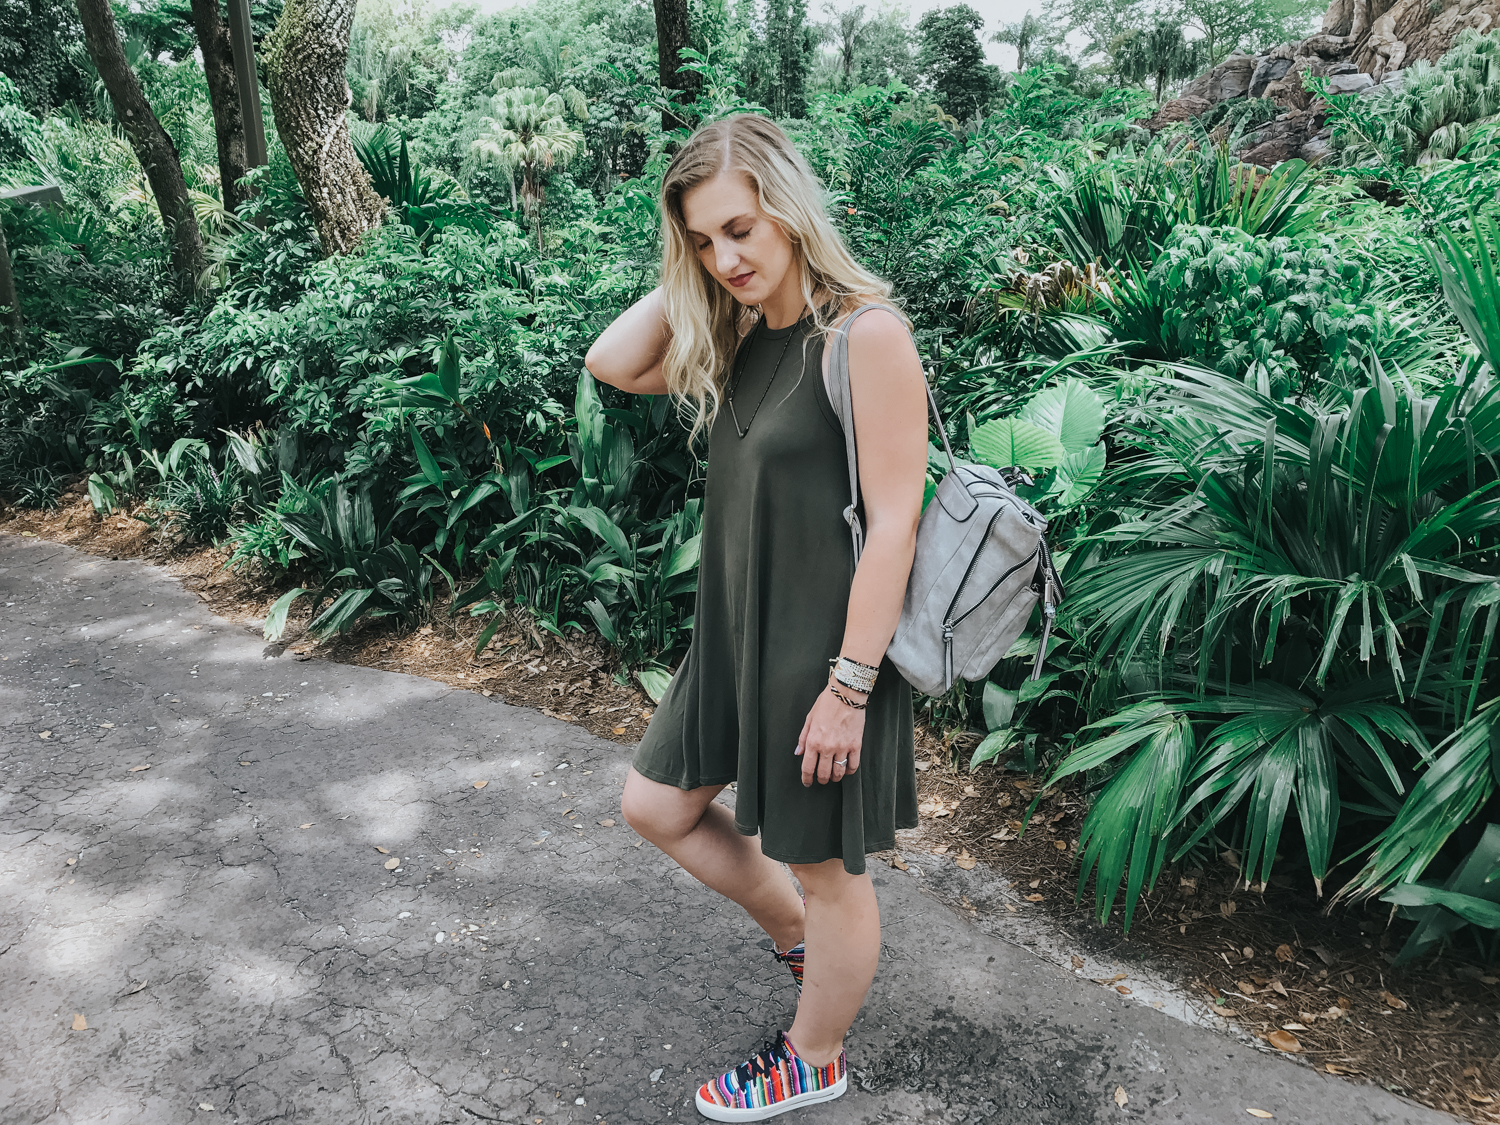 ISKAY Shoes - the comfortable, colorful sneakers I wore around Disney's Animal Kingdom (they have high tops too!)